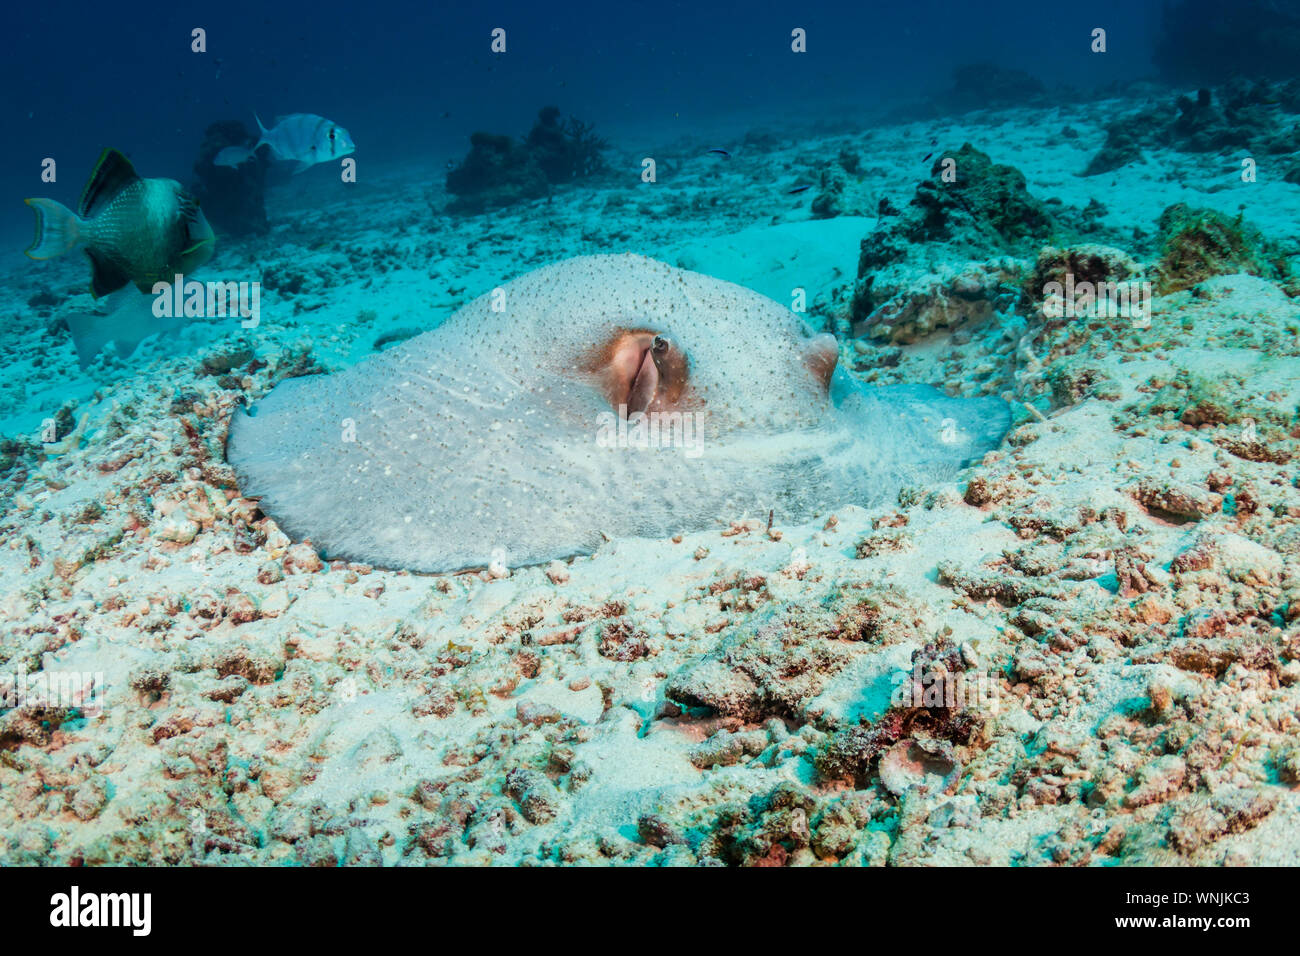 A Porcupine Stingray hiding in the sand on a coral reef Stock Photo